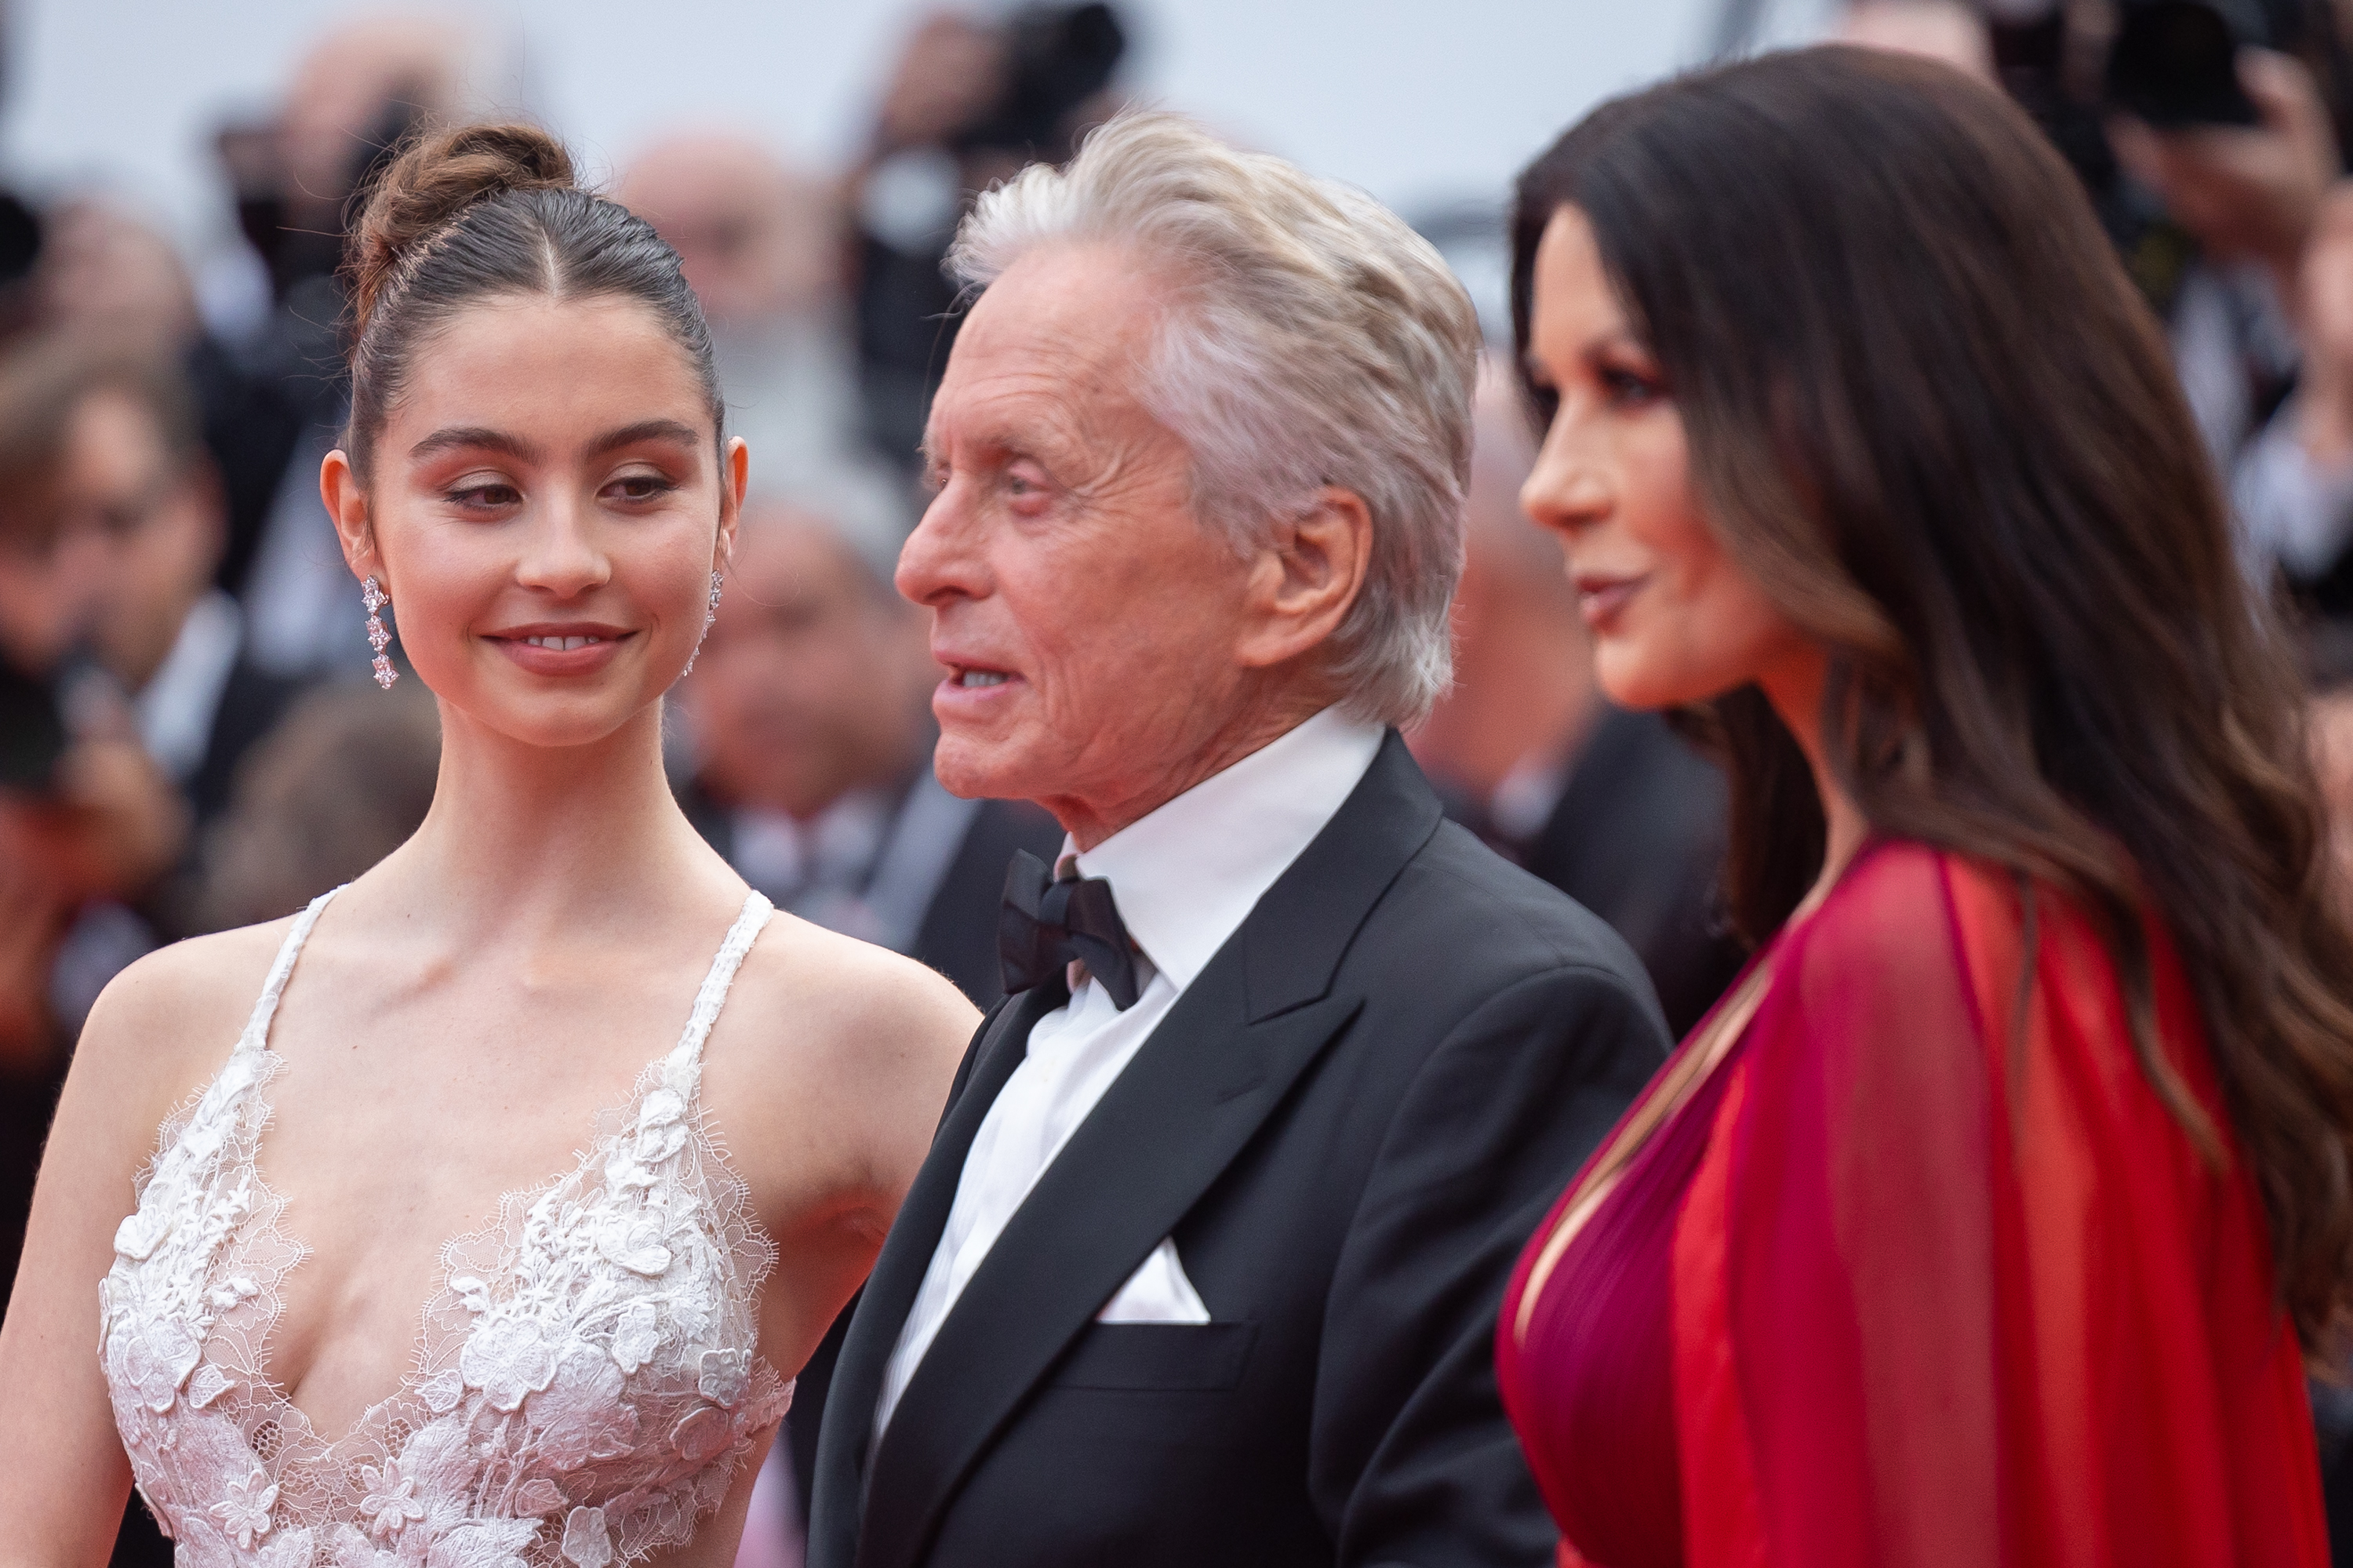 Carys Zeta Douglas, Michael Douglas, and Catherine Zeta-Jones at the "Jeanne du Barry" screening & opening ceremony at the 76th annual Cannes Film Festival on May 16, 2023, in Cannes, France | Source: Getty Images